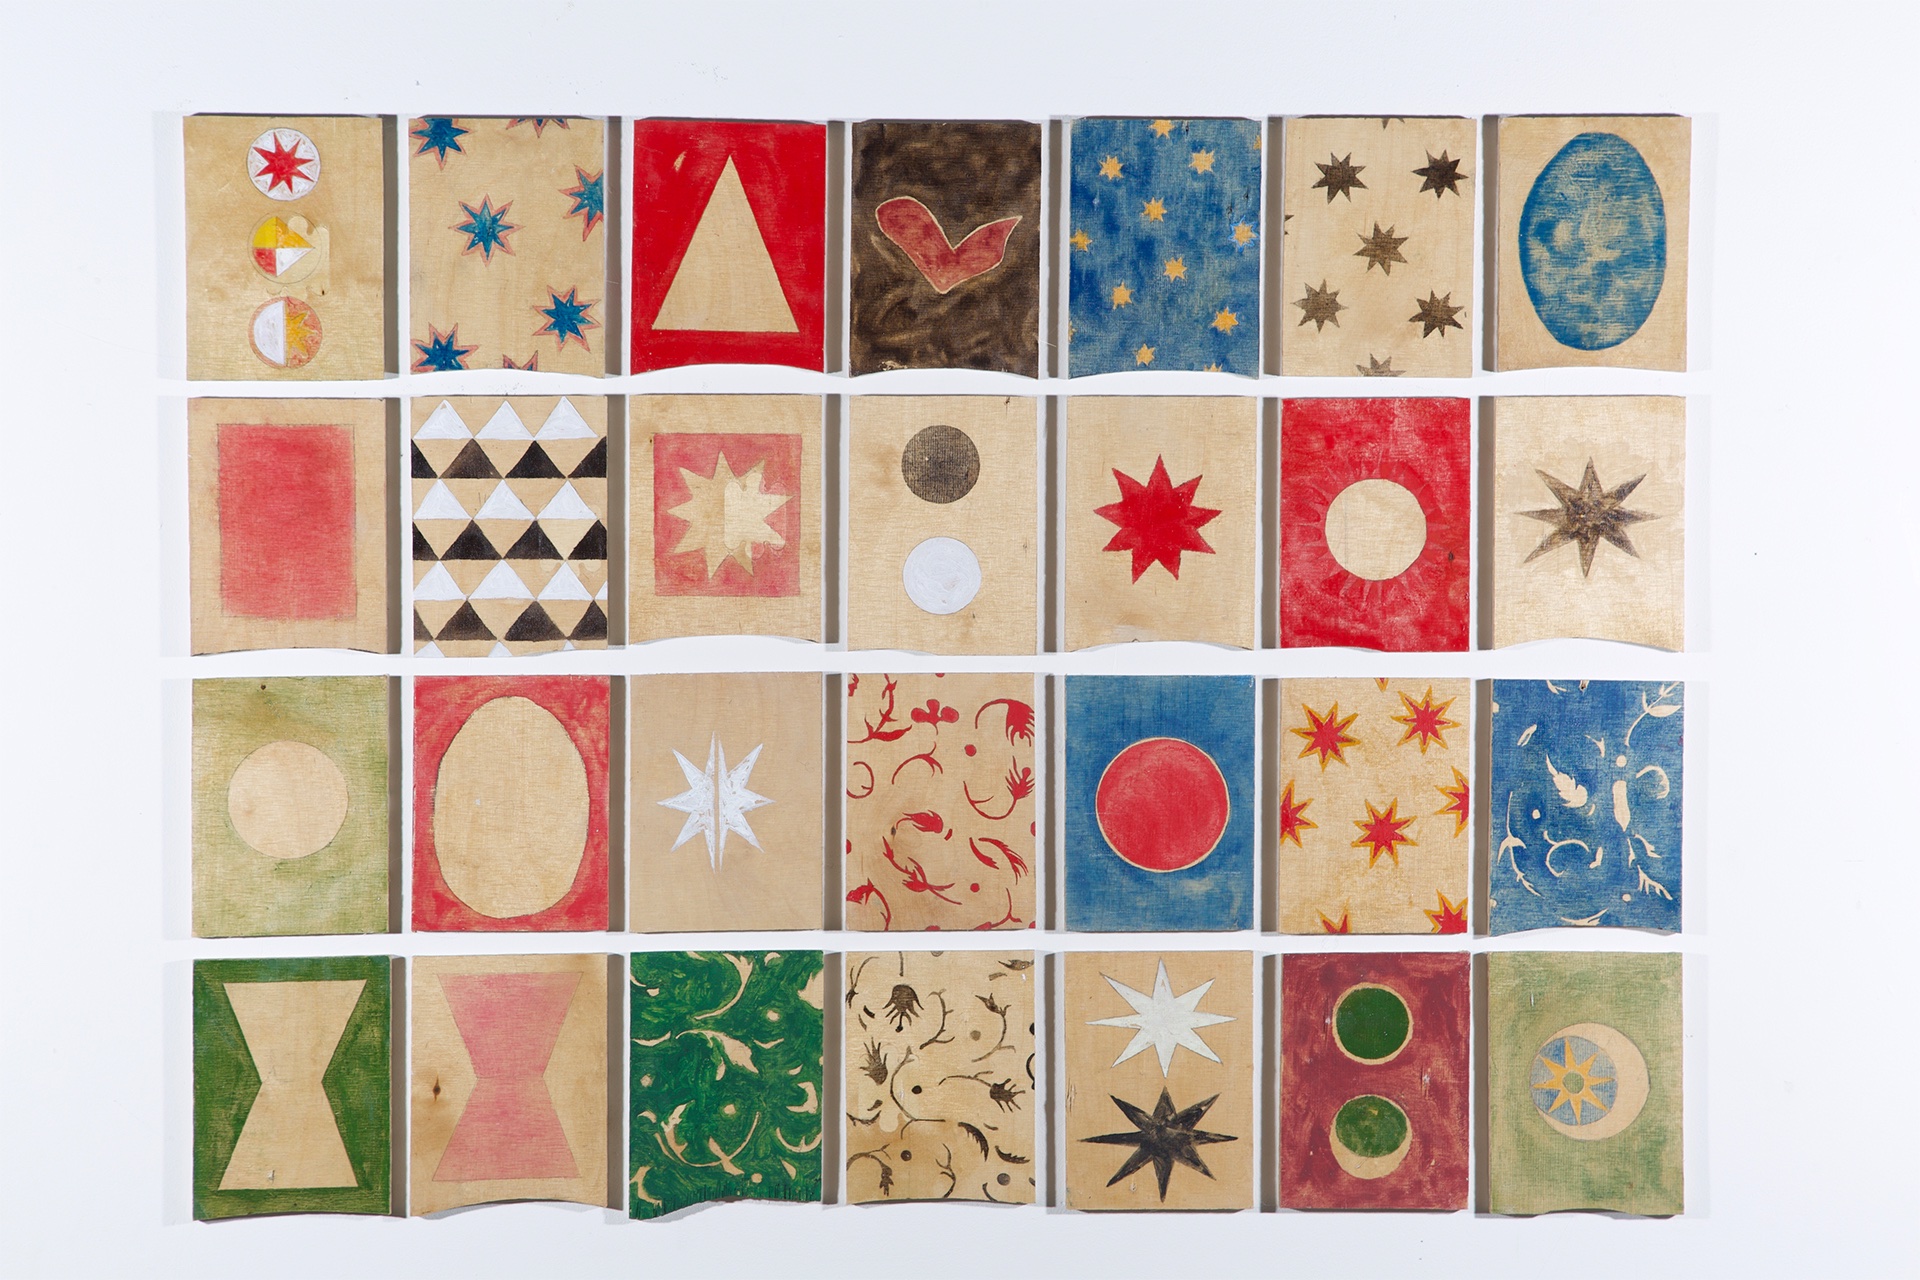 Collection of 28 wood tiles. Painted with various motifs and symbols. Thin layers of paint over exposed wood.